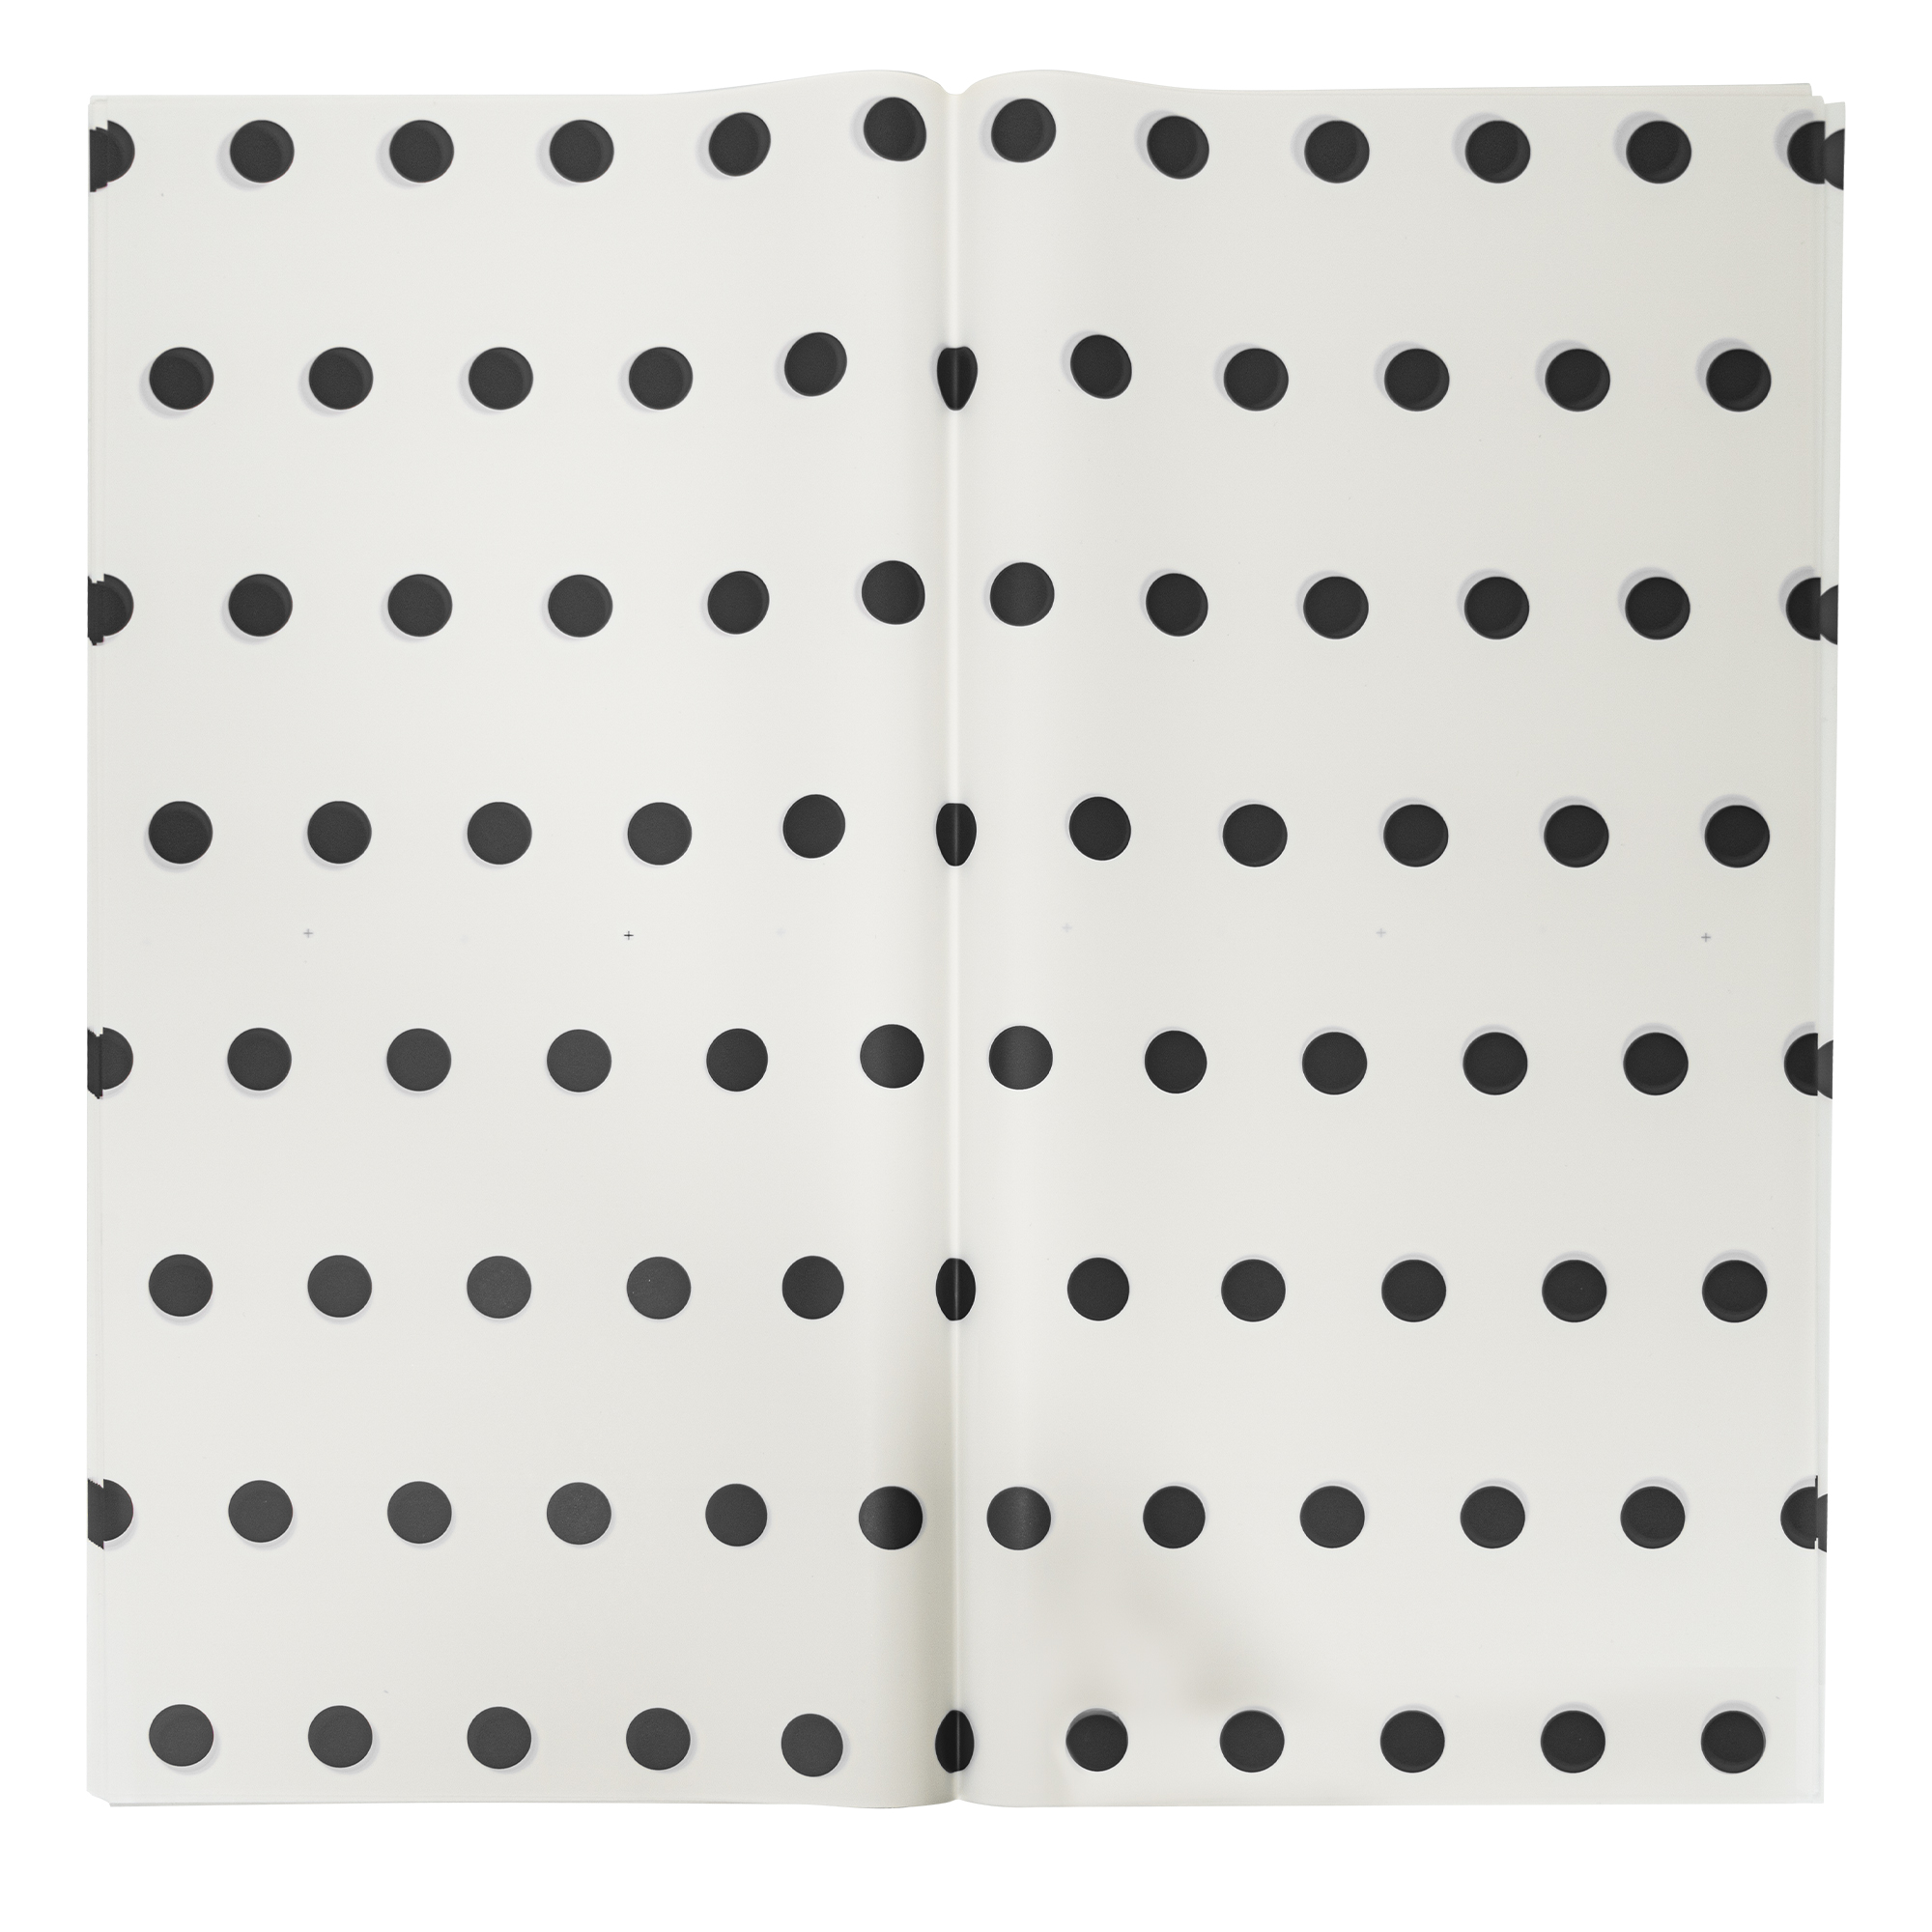 Floral Wrapping Paper With Polka Dots 20pc/pack  - Black